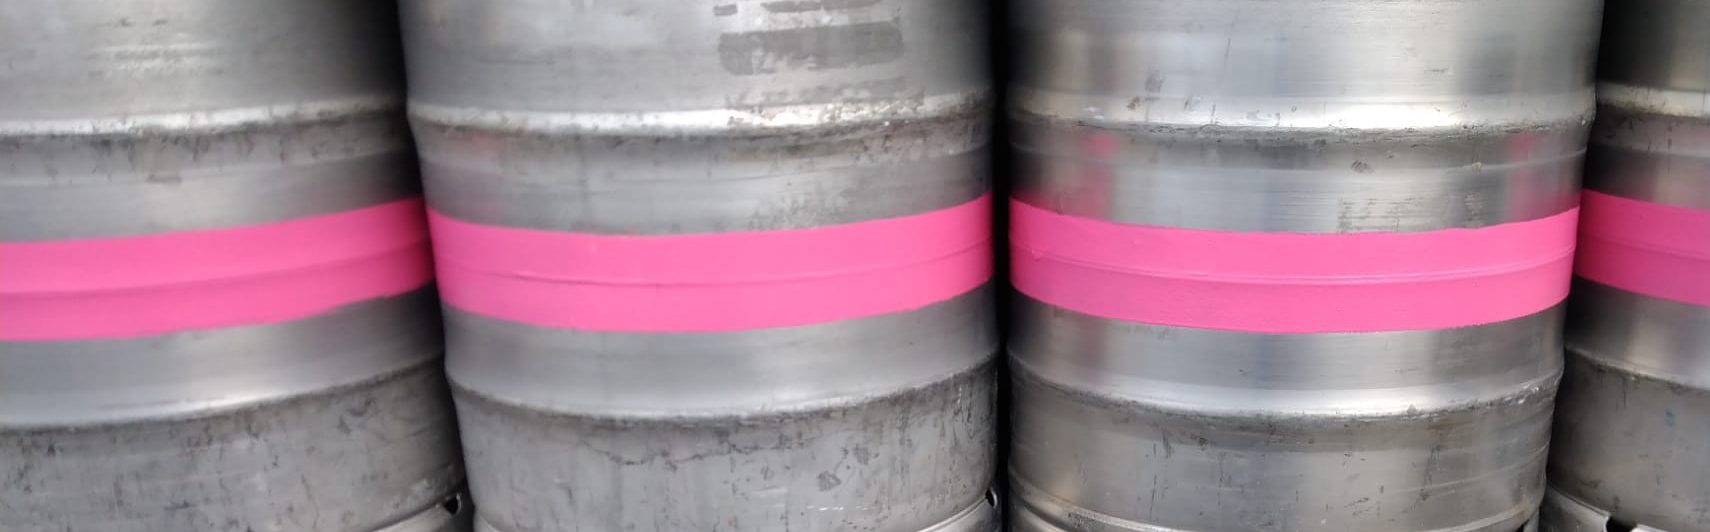 Application of the Colour Ring - ellmers GmbH - Mobiler Keg Reparaturservice